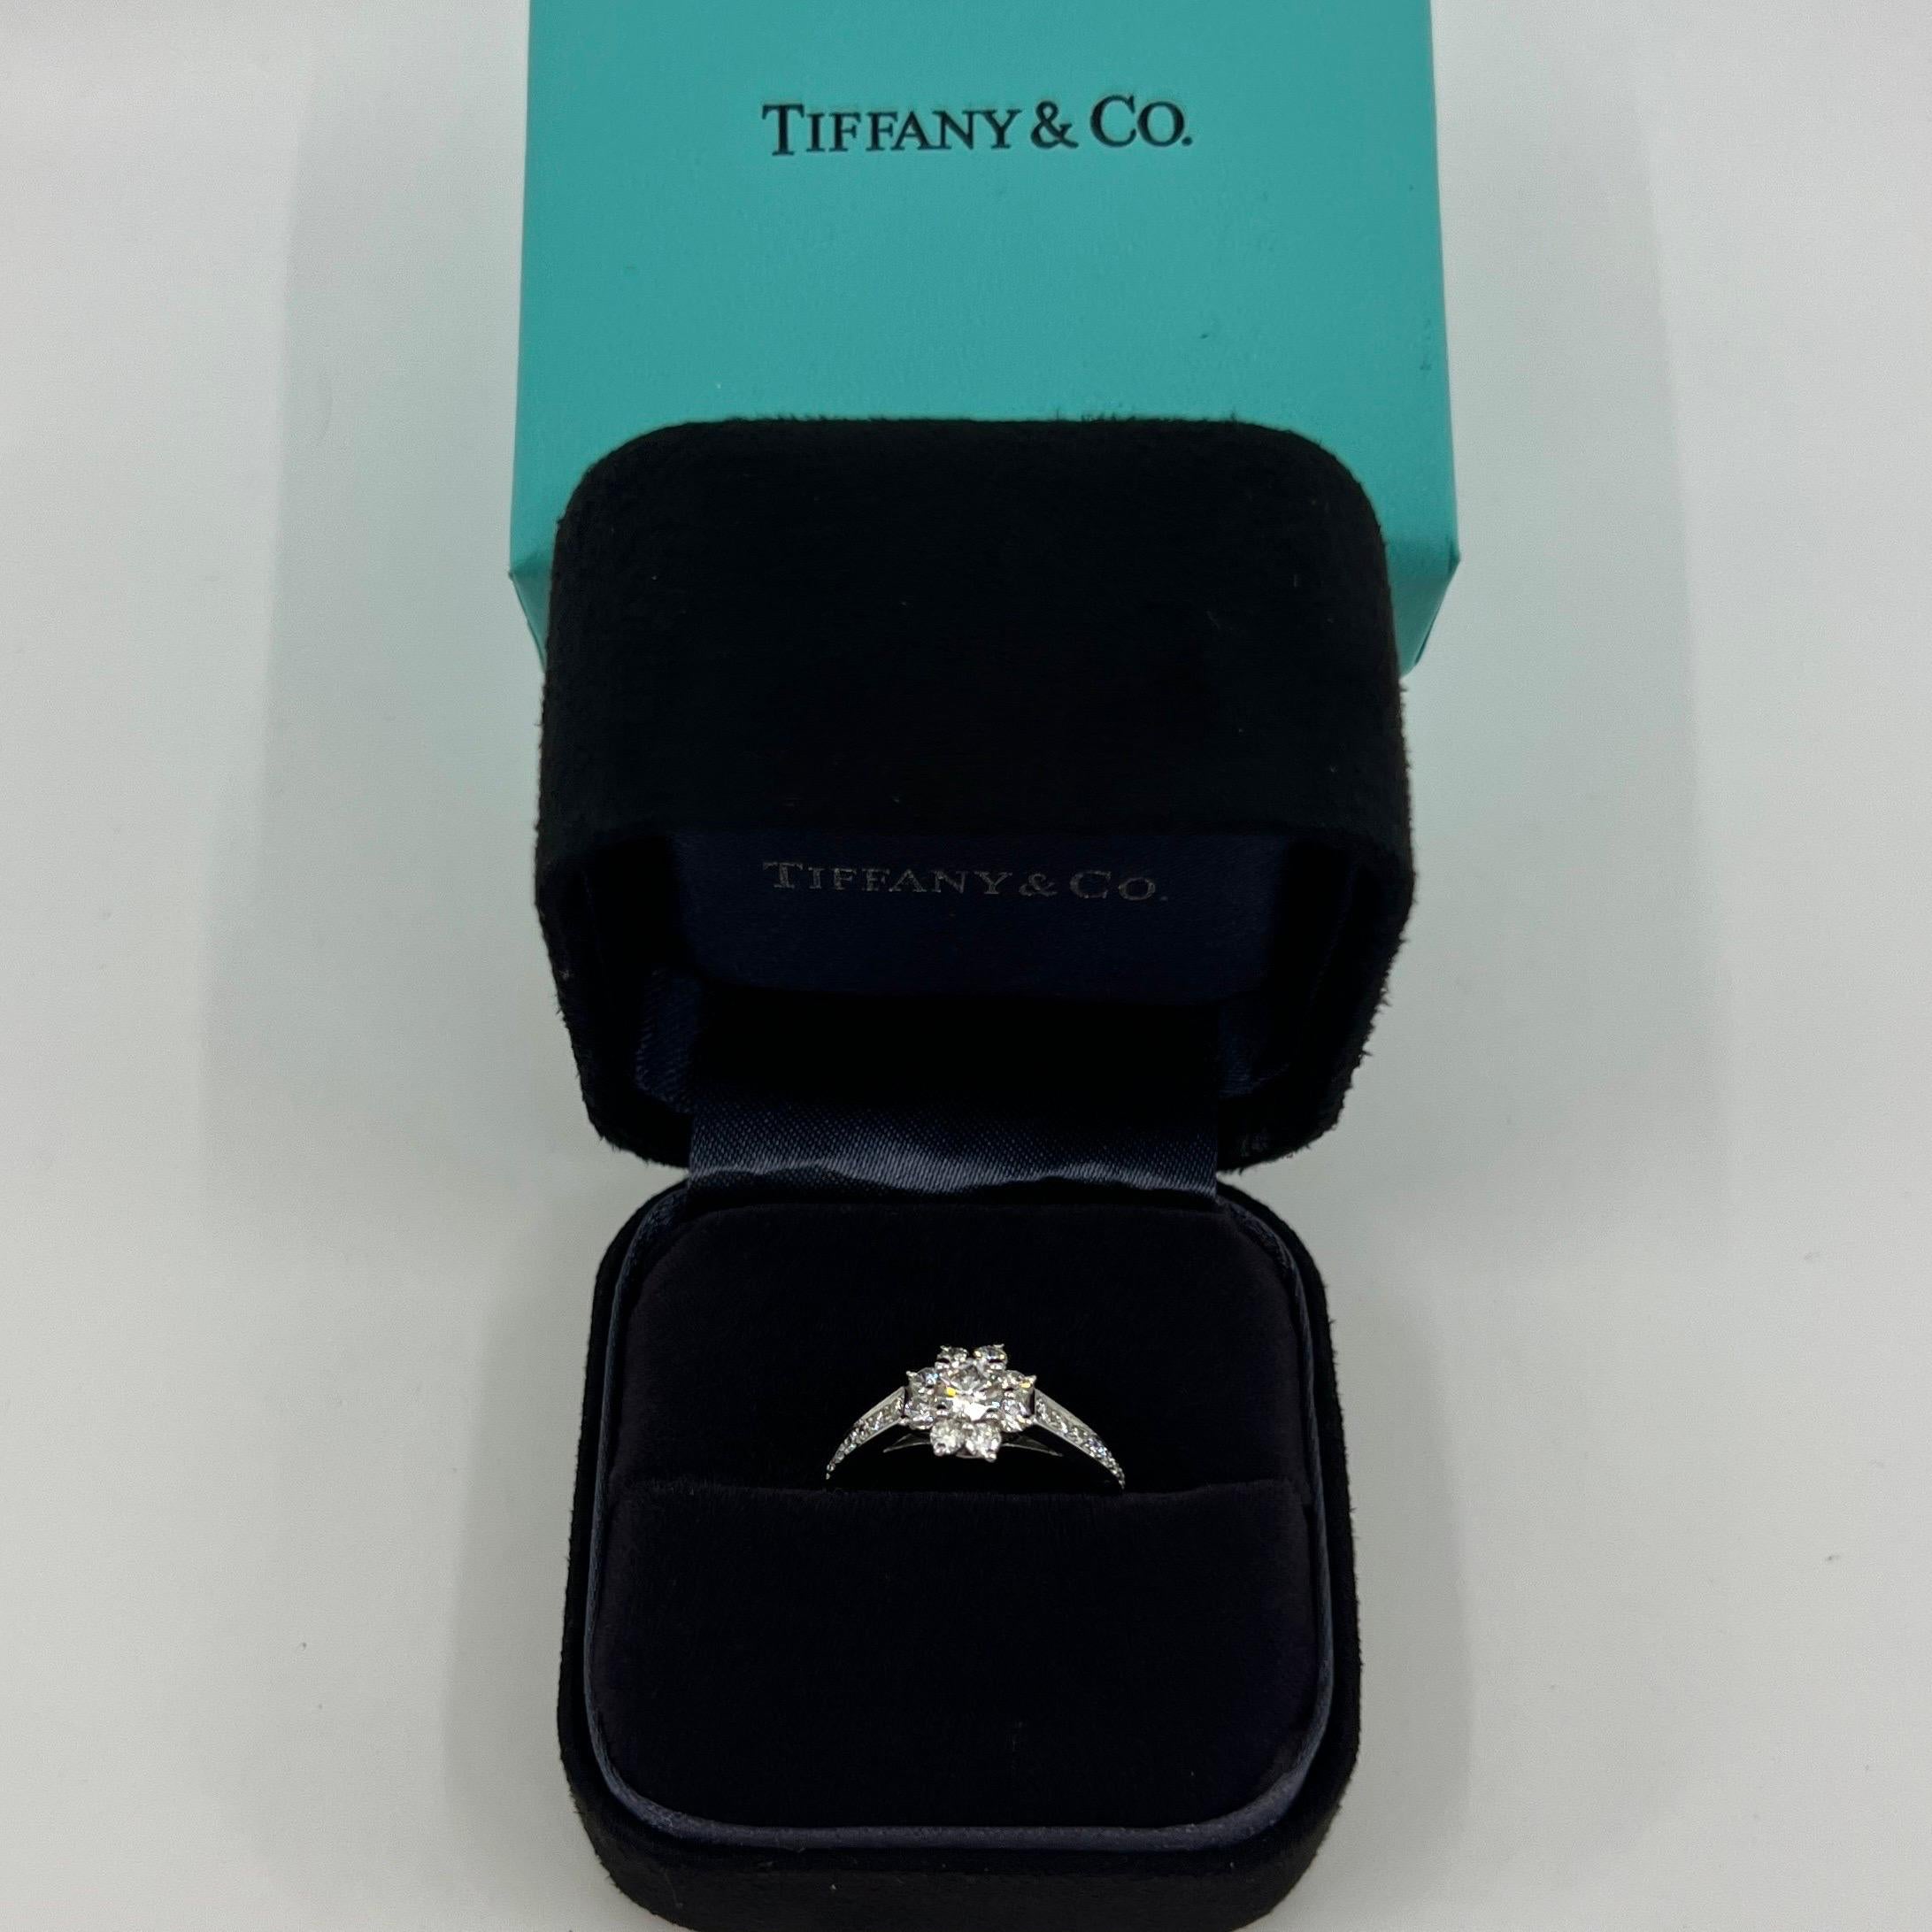 Vintage Tiffany & Co. Diamond Flower Buttercup 950 Platinum Ring.

A beautifully made platinum cluster ring set with excellent quality natural white diamonds. Superb cut, clarity and colour - as to be expected by Tiffany & Co.

The ring features a